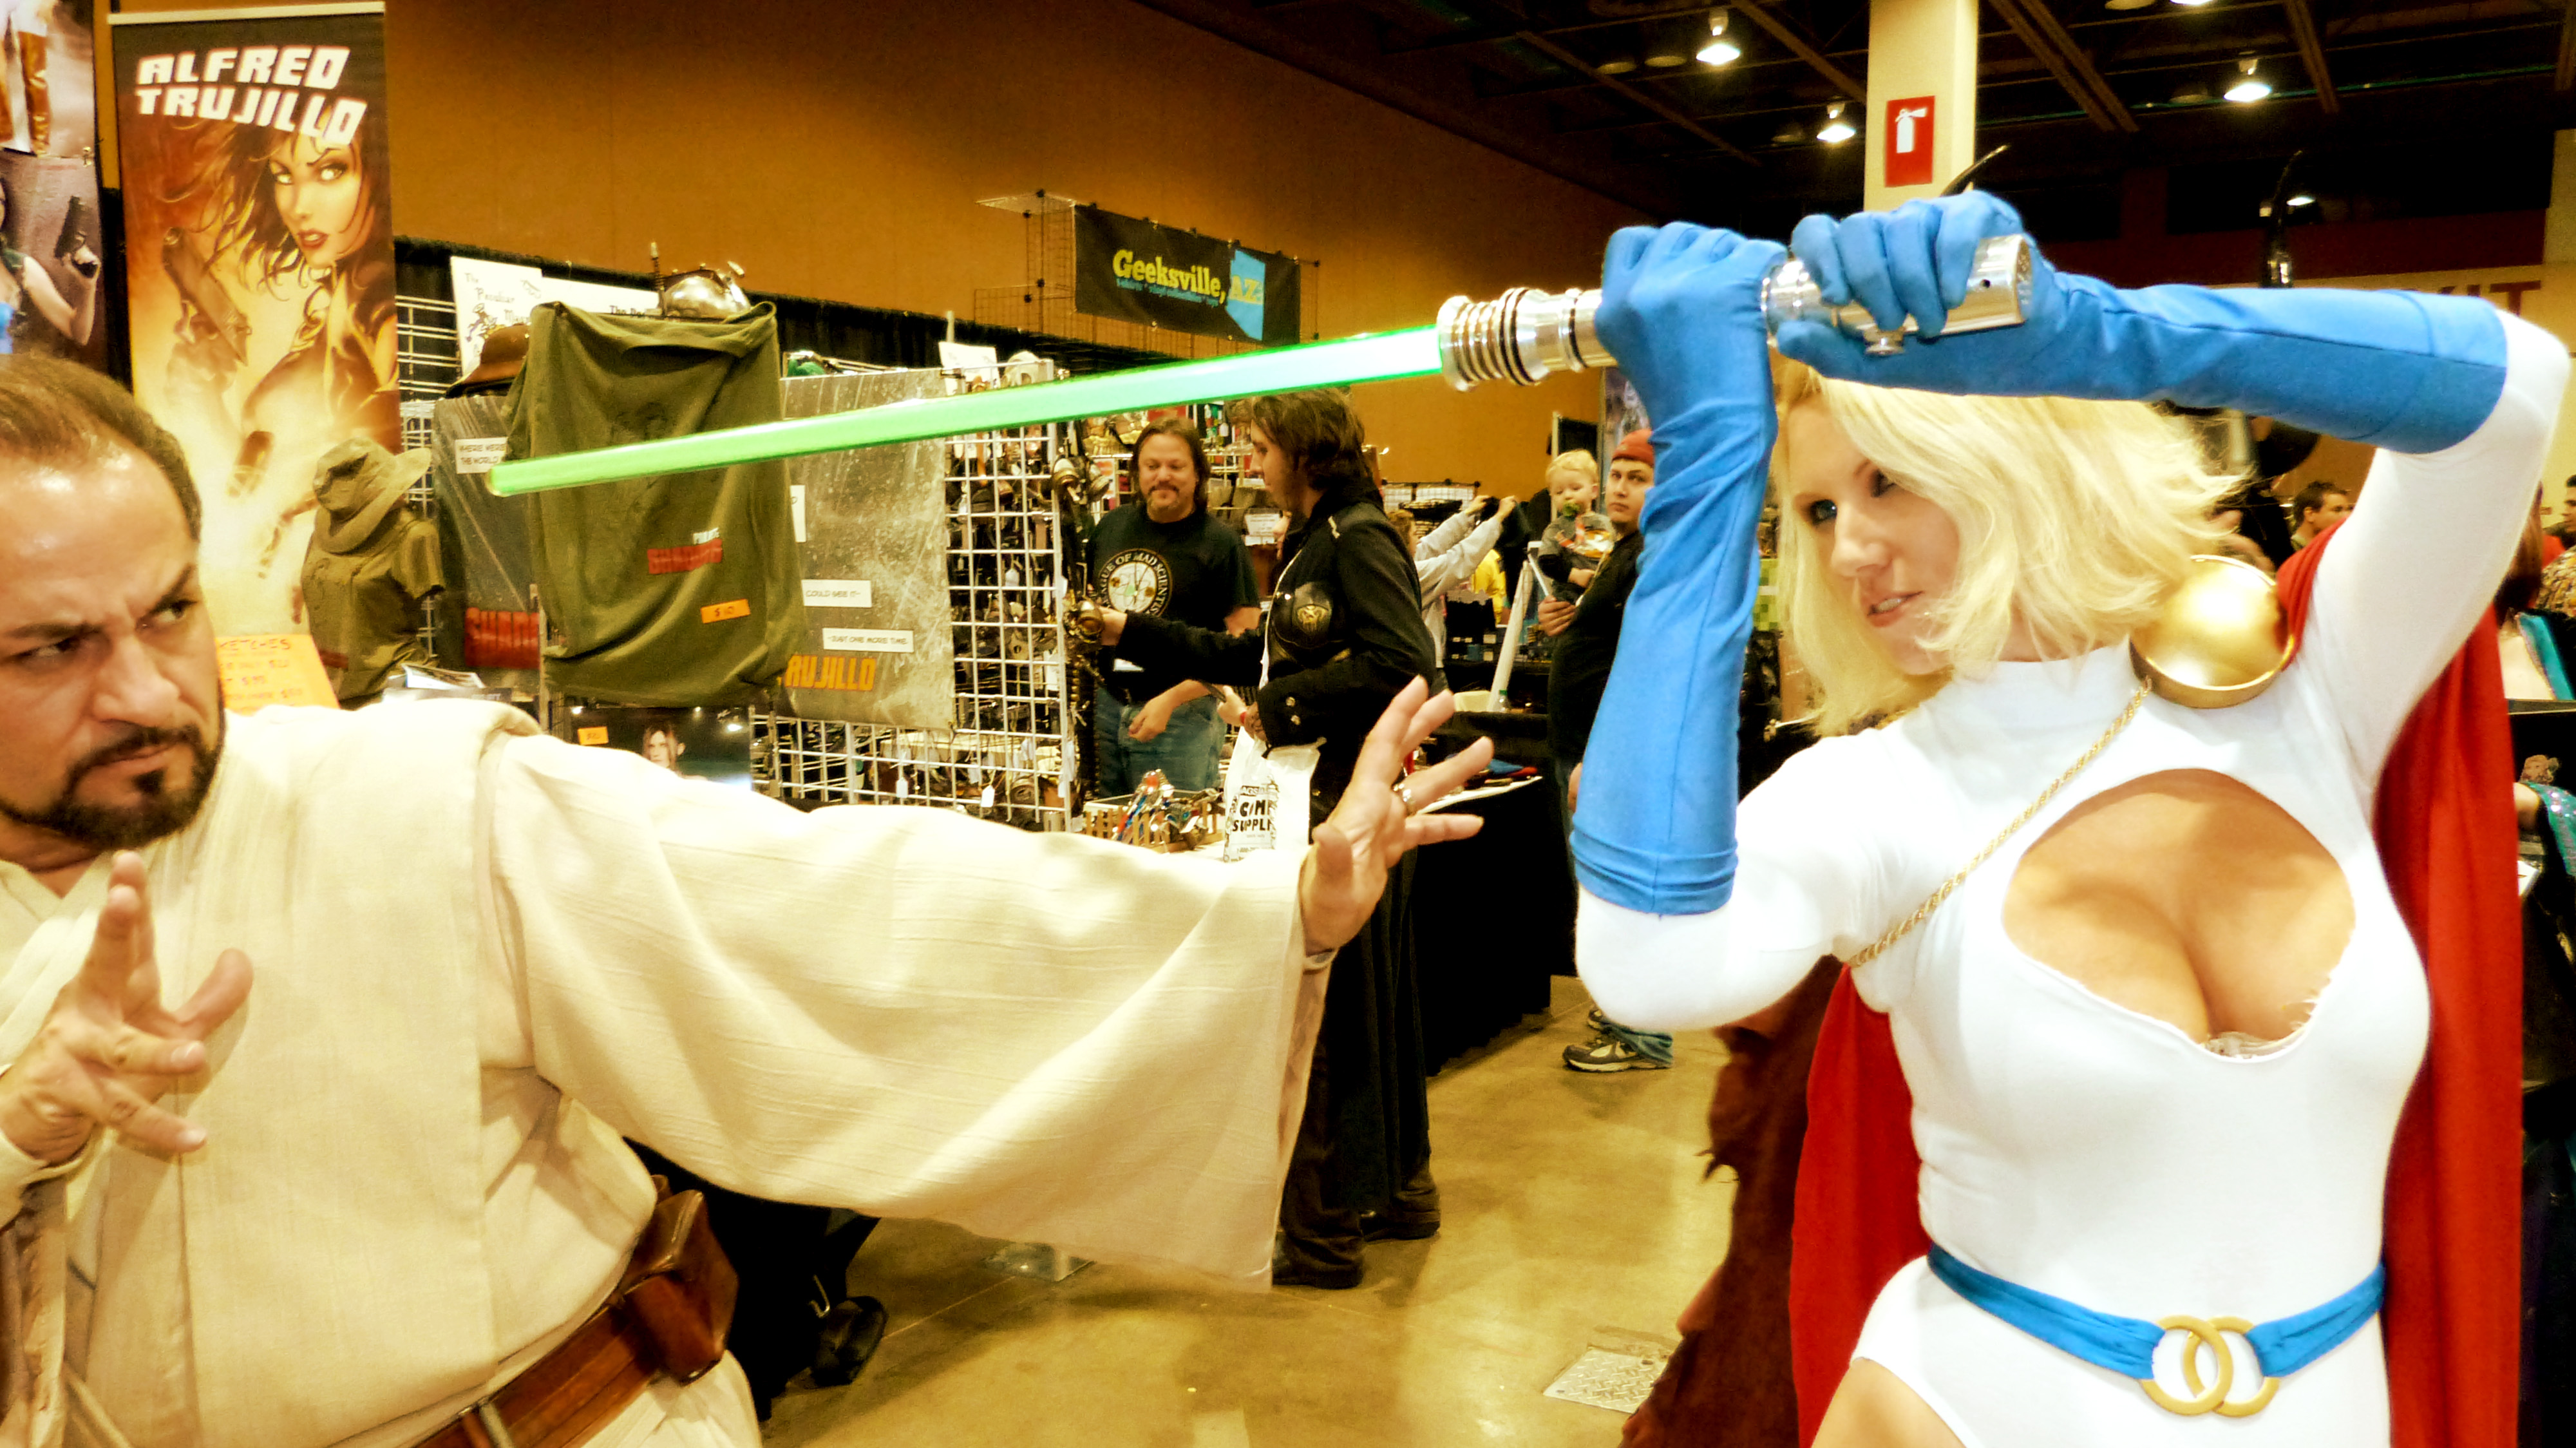 Cosplayer AZ Power Girl at a recent convention.